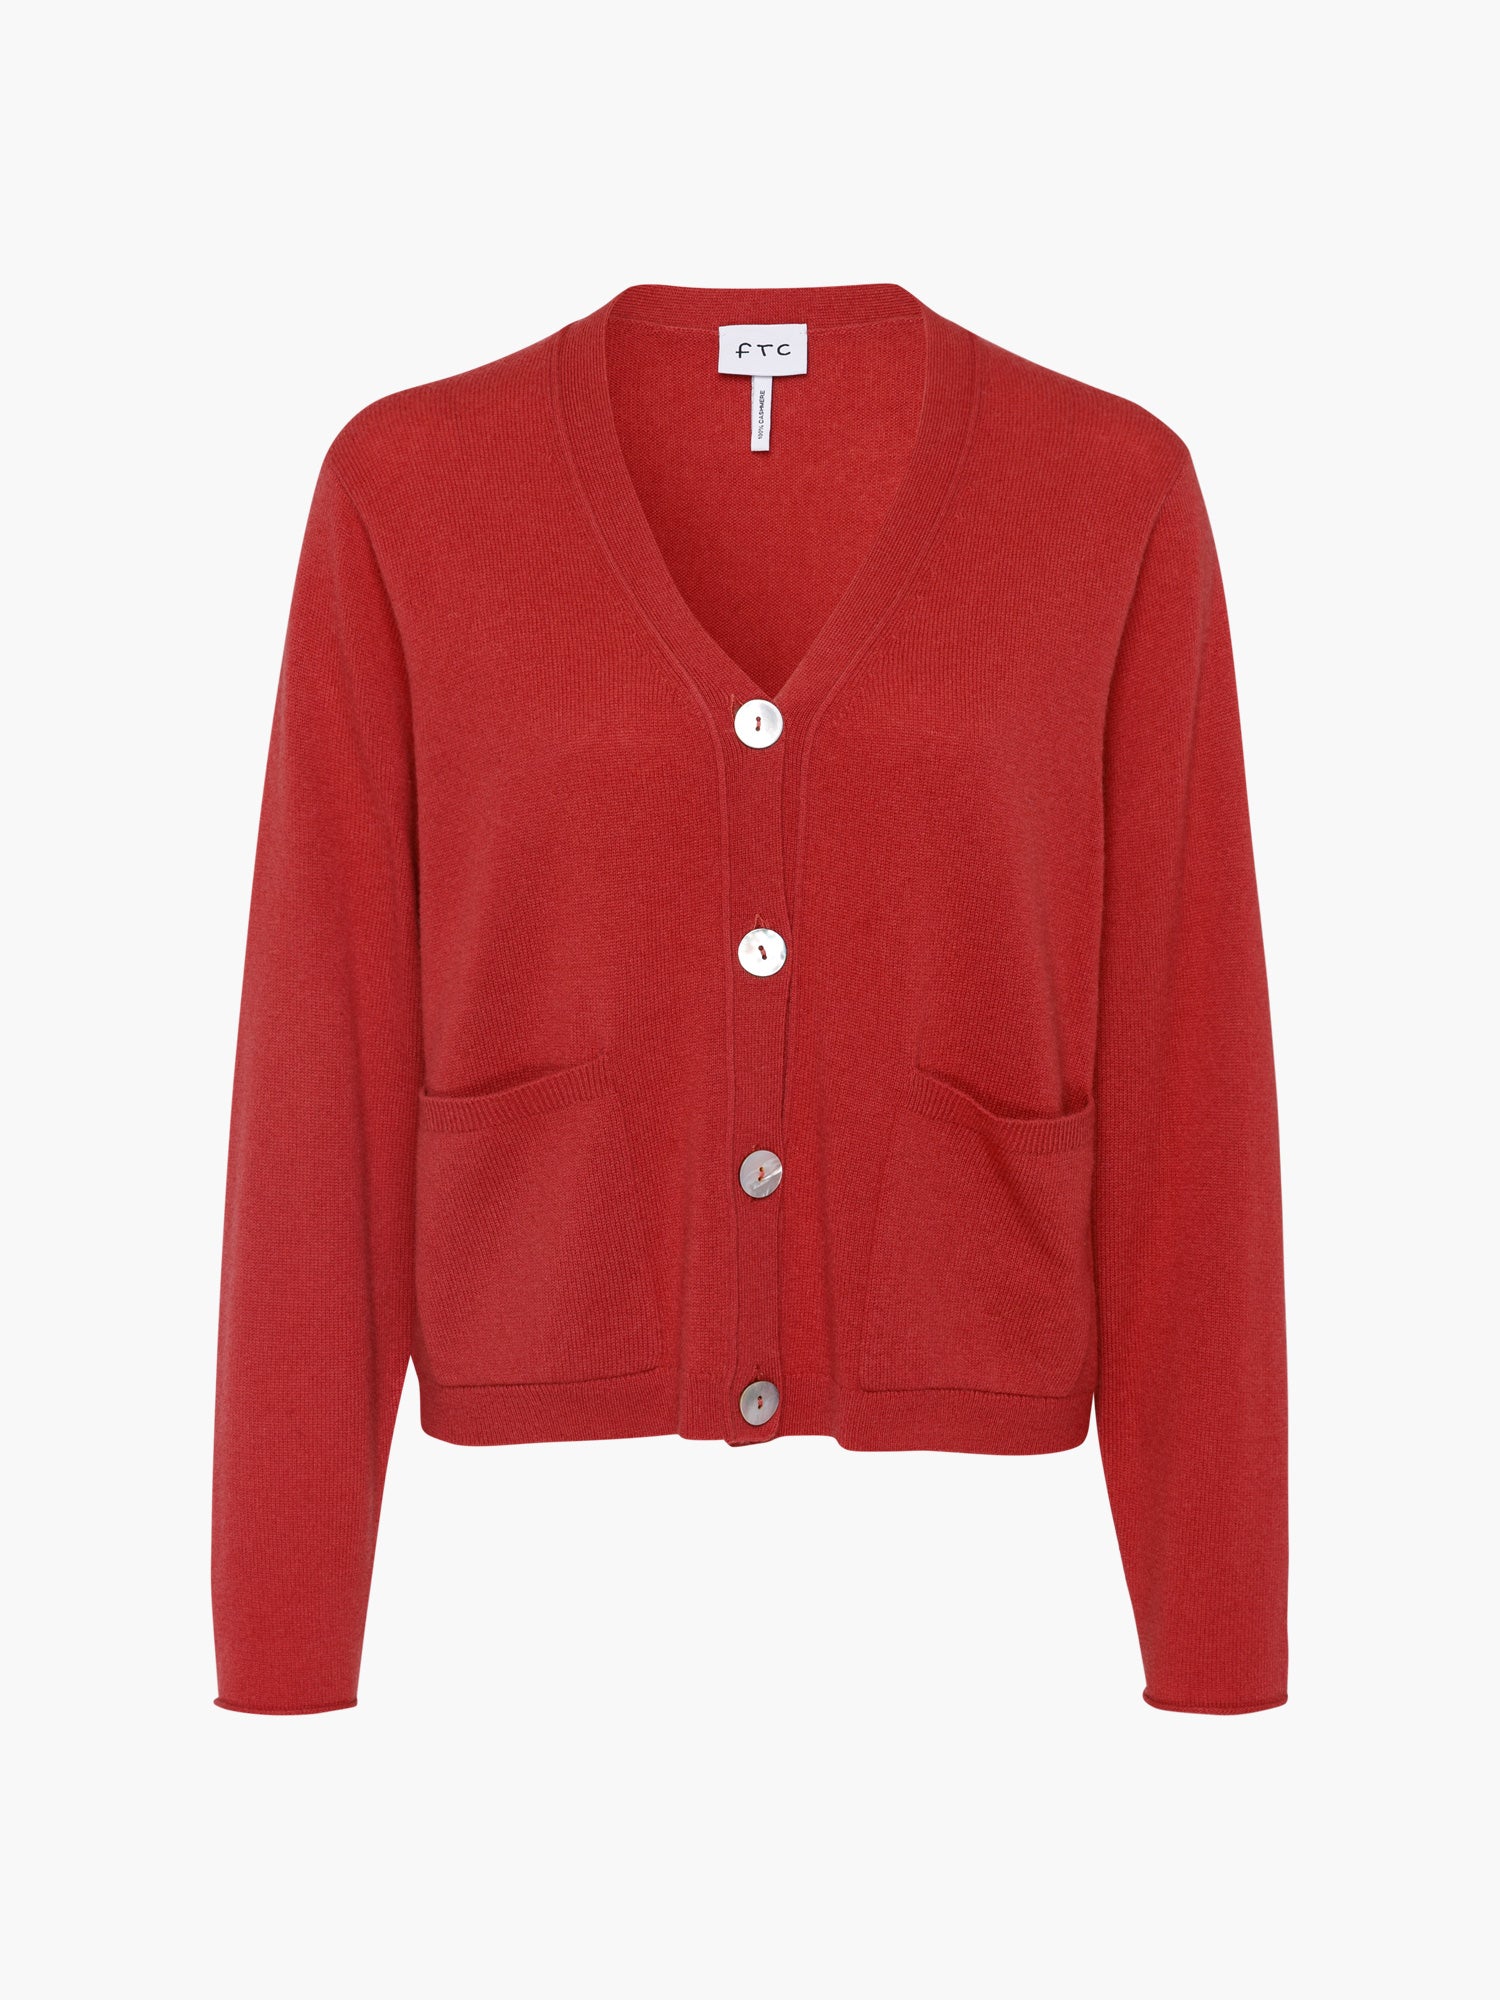 FTC-Cashmere-OUTLET-SALE-Cardigan-VN-Strick-ARCHIVE-COLLECTION_b2662045-0c47-44ee-979d-9862a7a8807b.jpg